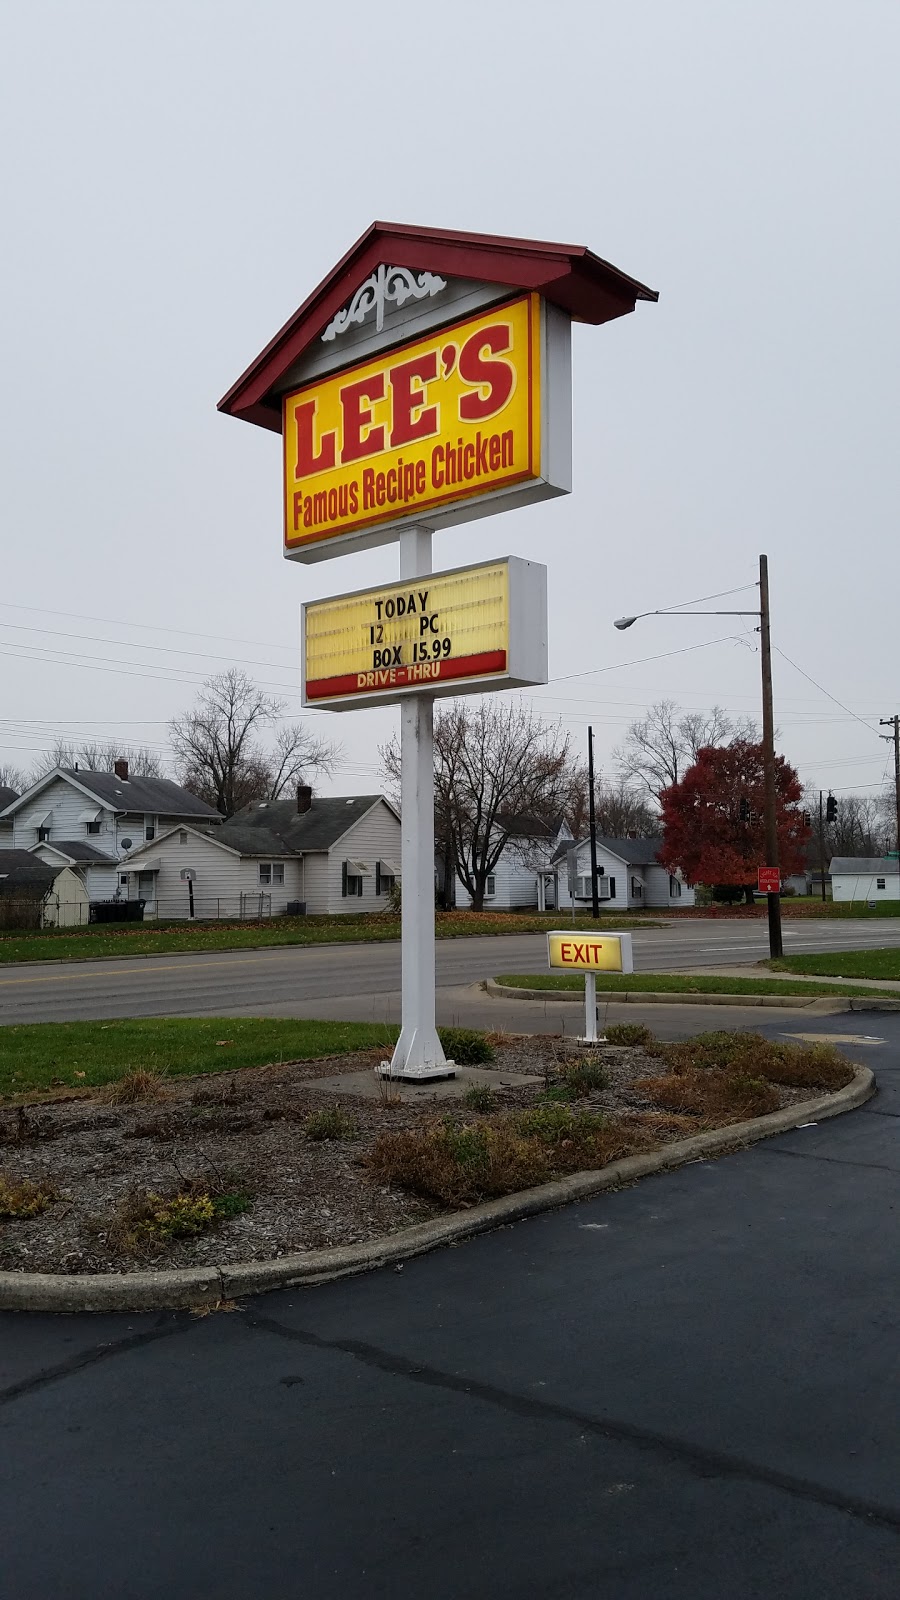 Lees Famous Recipe Chicken | 2011 N Verity Pkwy, Middletown, OH 45042 | Phone: (513) 423-2999